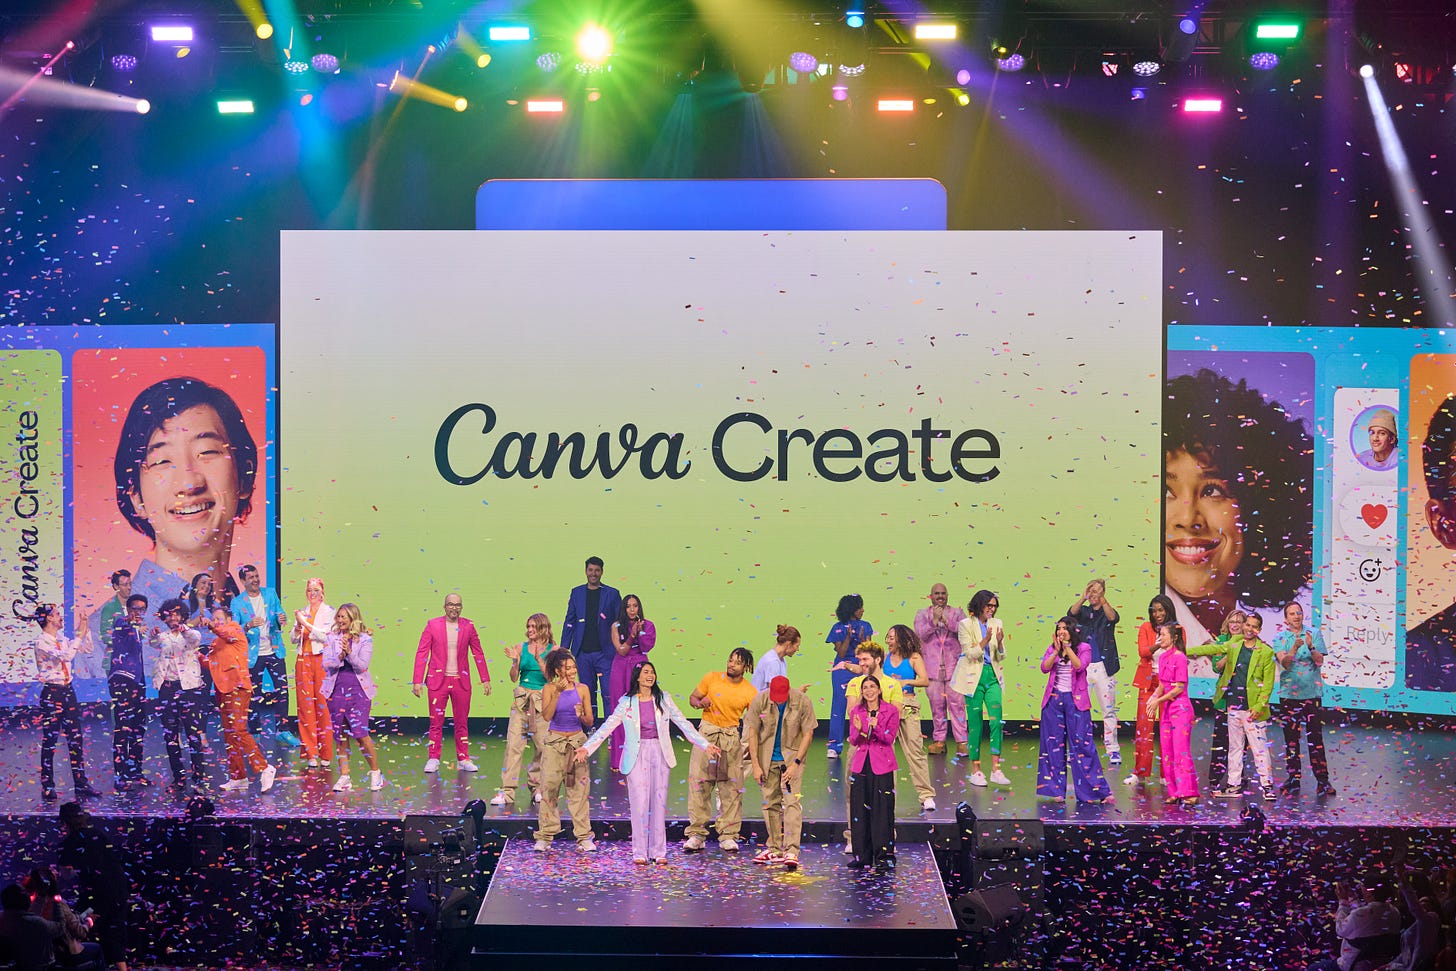 Canva cofounders Cliff Obrecht, Melanie Perkins and Cameron Adams on a large stage at Canva Create 2024 with approximately 31 Canva team members surrounding them. There is confetti falling to the ground and colorful lights in the background. A yellow screen behind them says Canva Create.